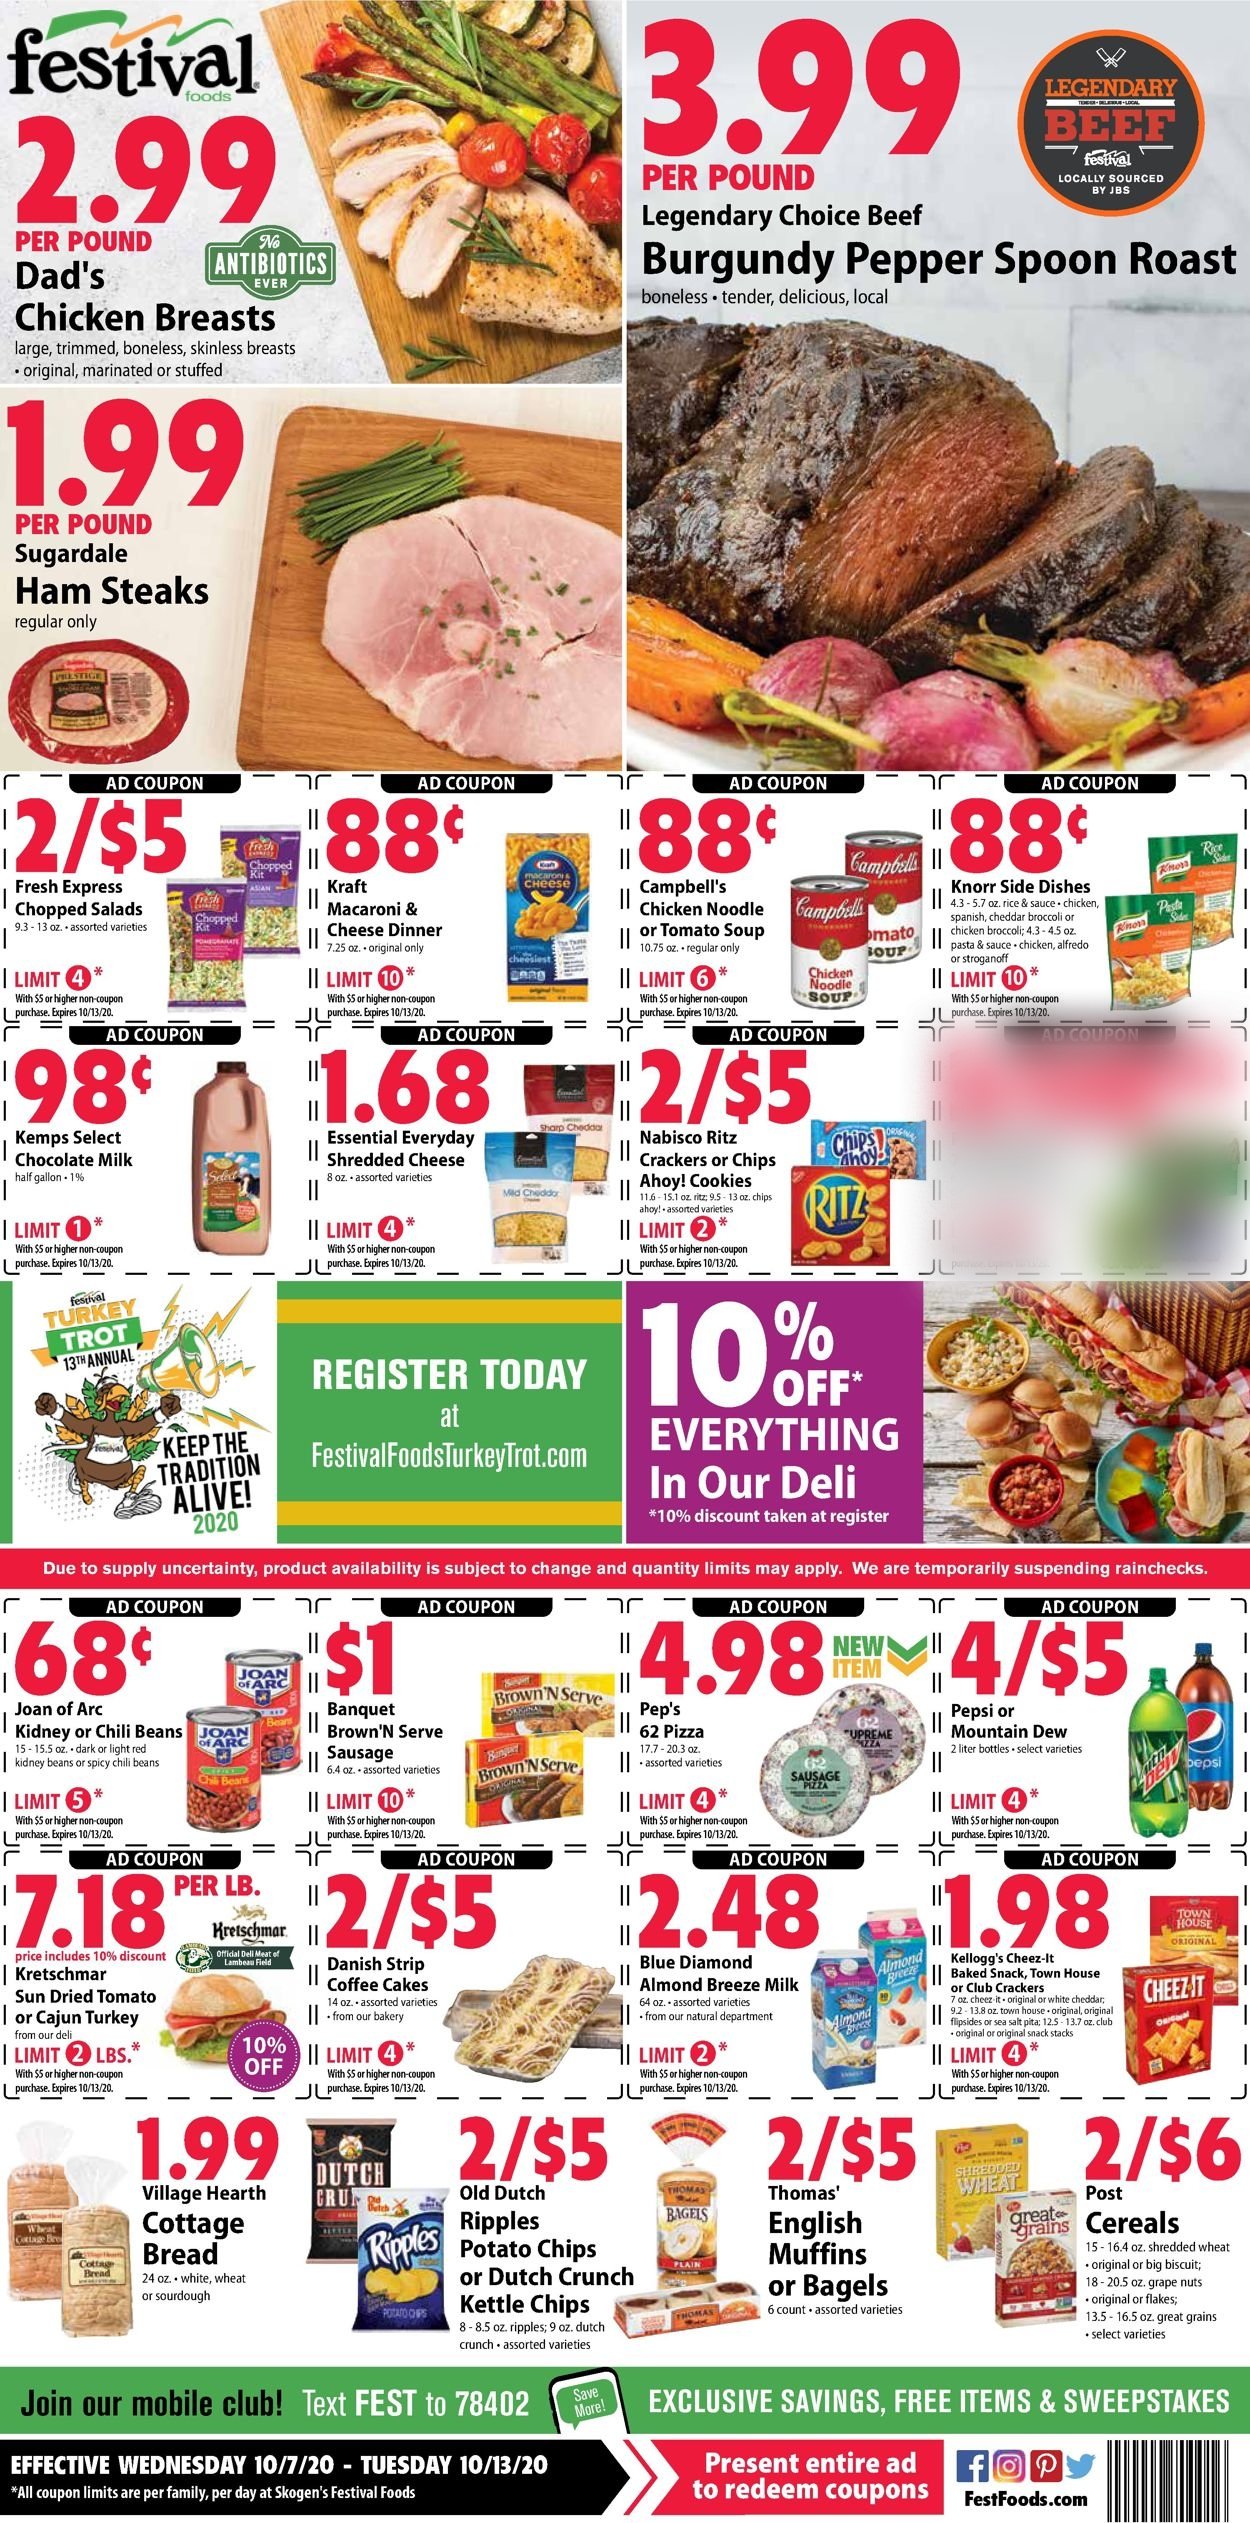 Festival Foods Current weekly ad 09/30 10/13/2020